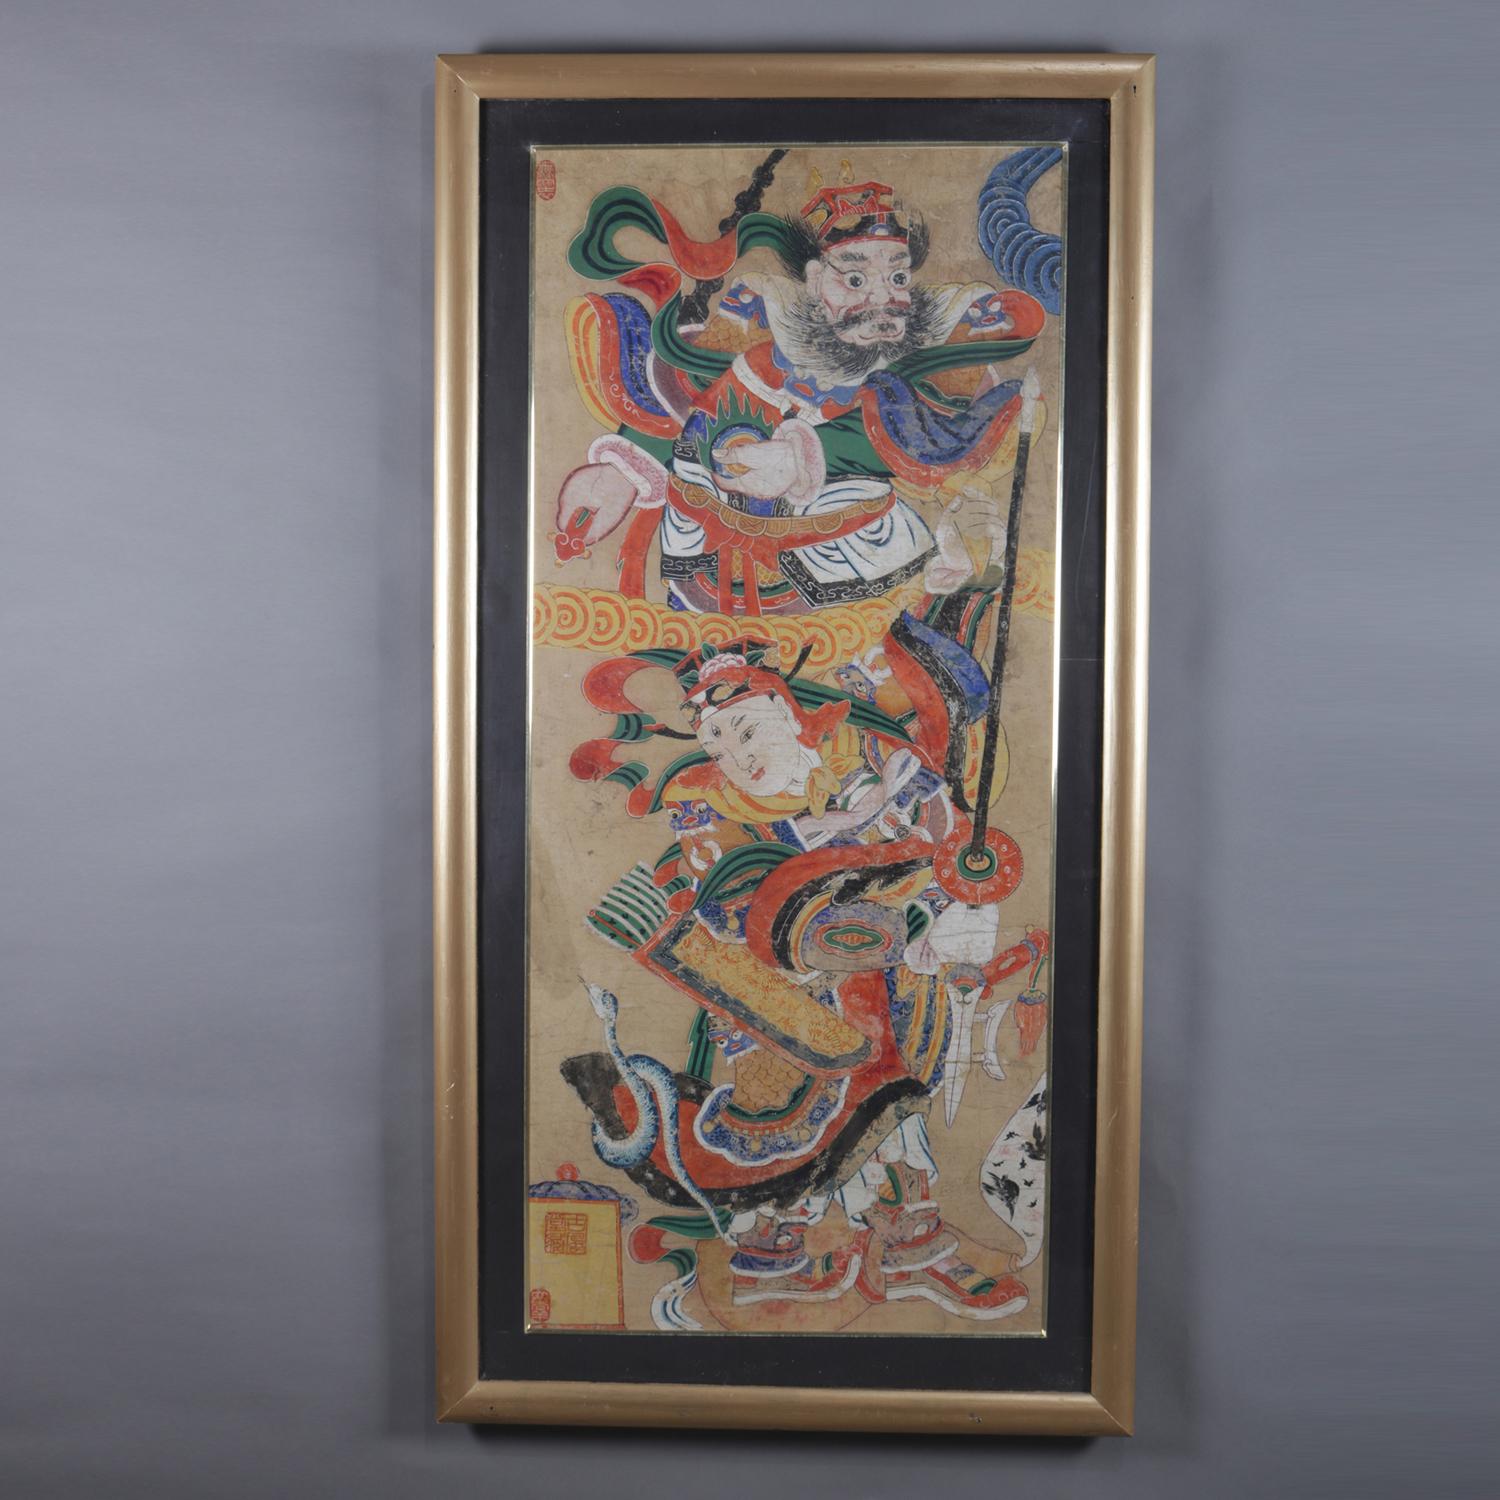 Antique monumental Chinese painting on paper depicts two warriors or warrior spirits, signed upper left and lower left, seated in frame with protective plexiglass, 19th century.

Measures: 63